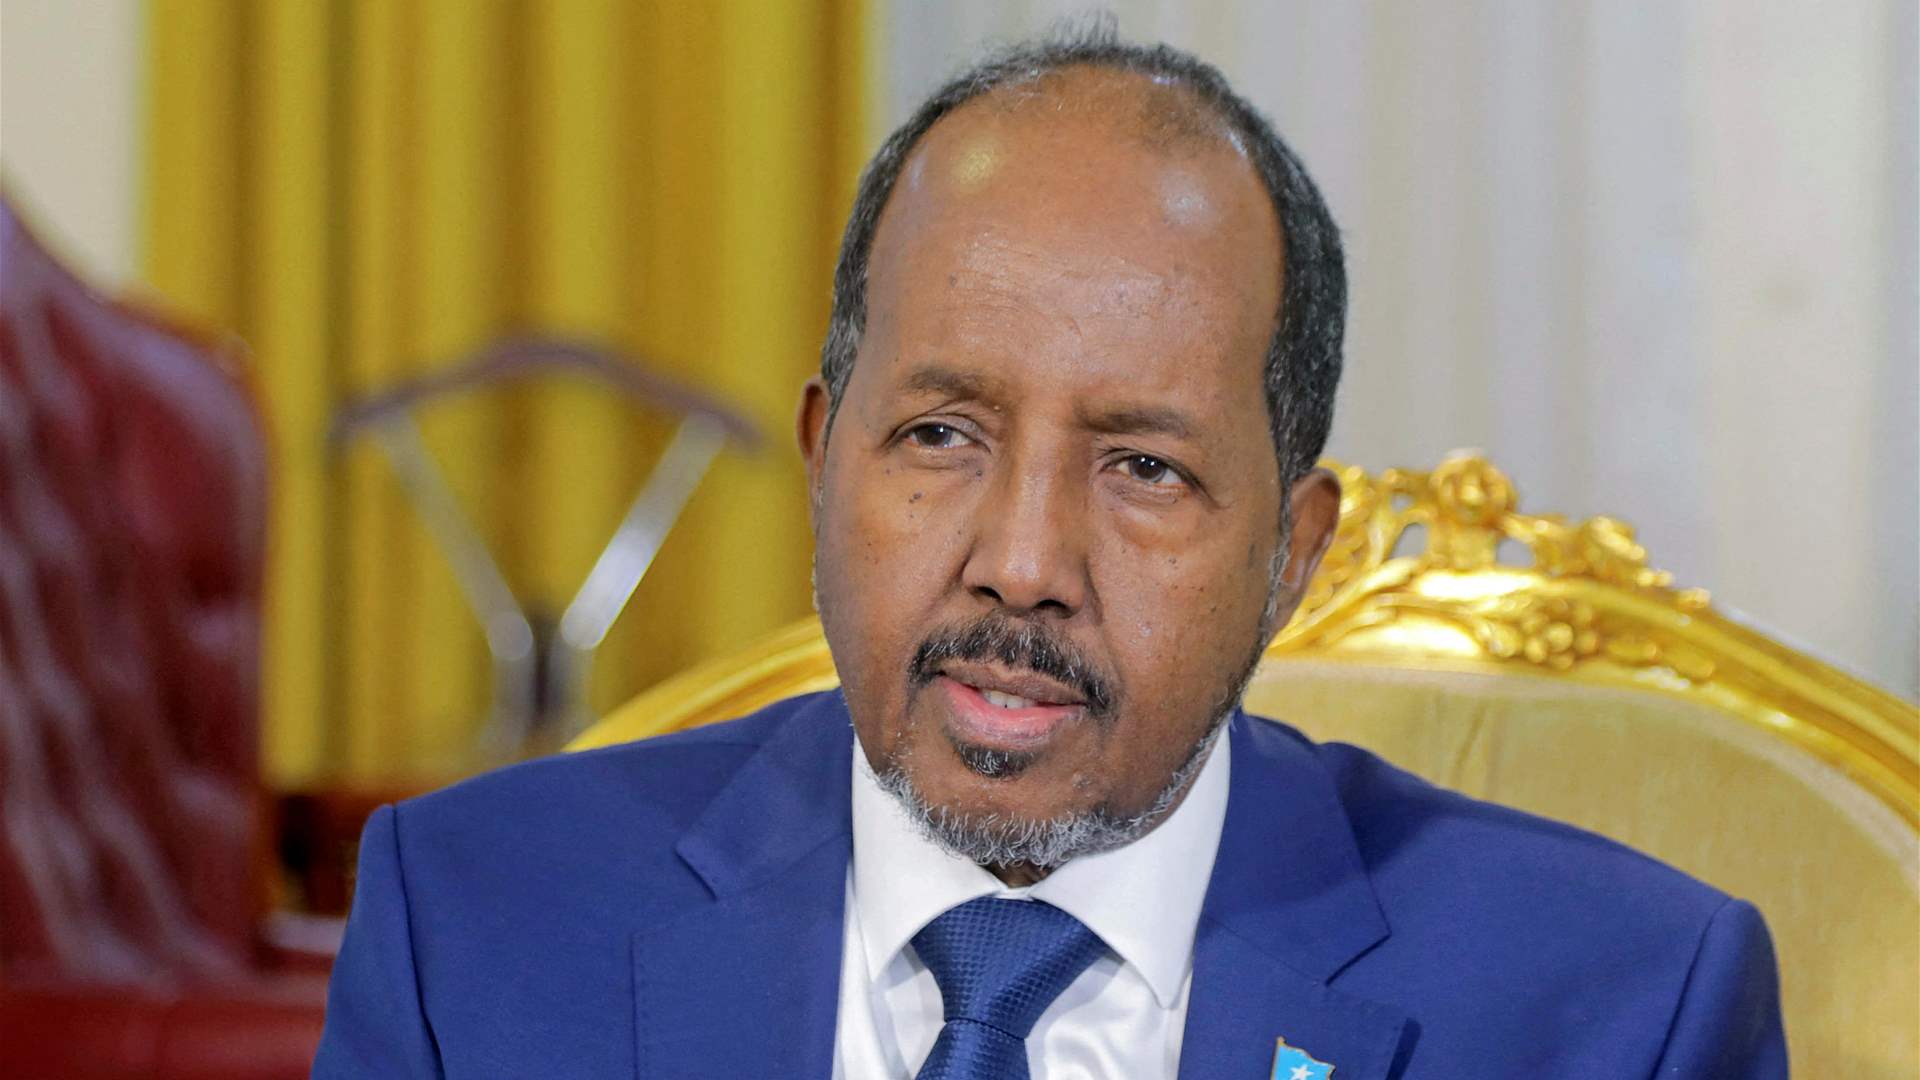 Somalian president welcomes end of UN arms embargo